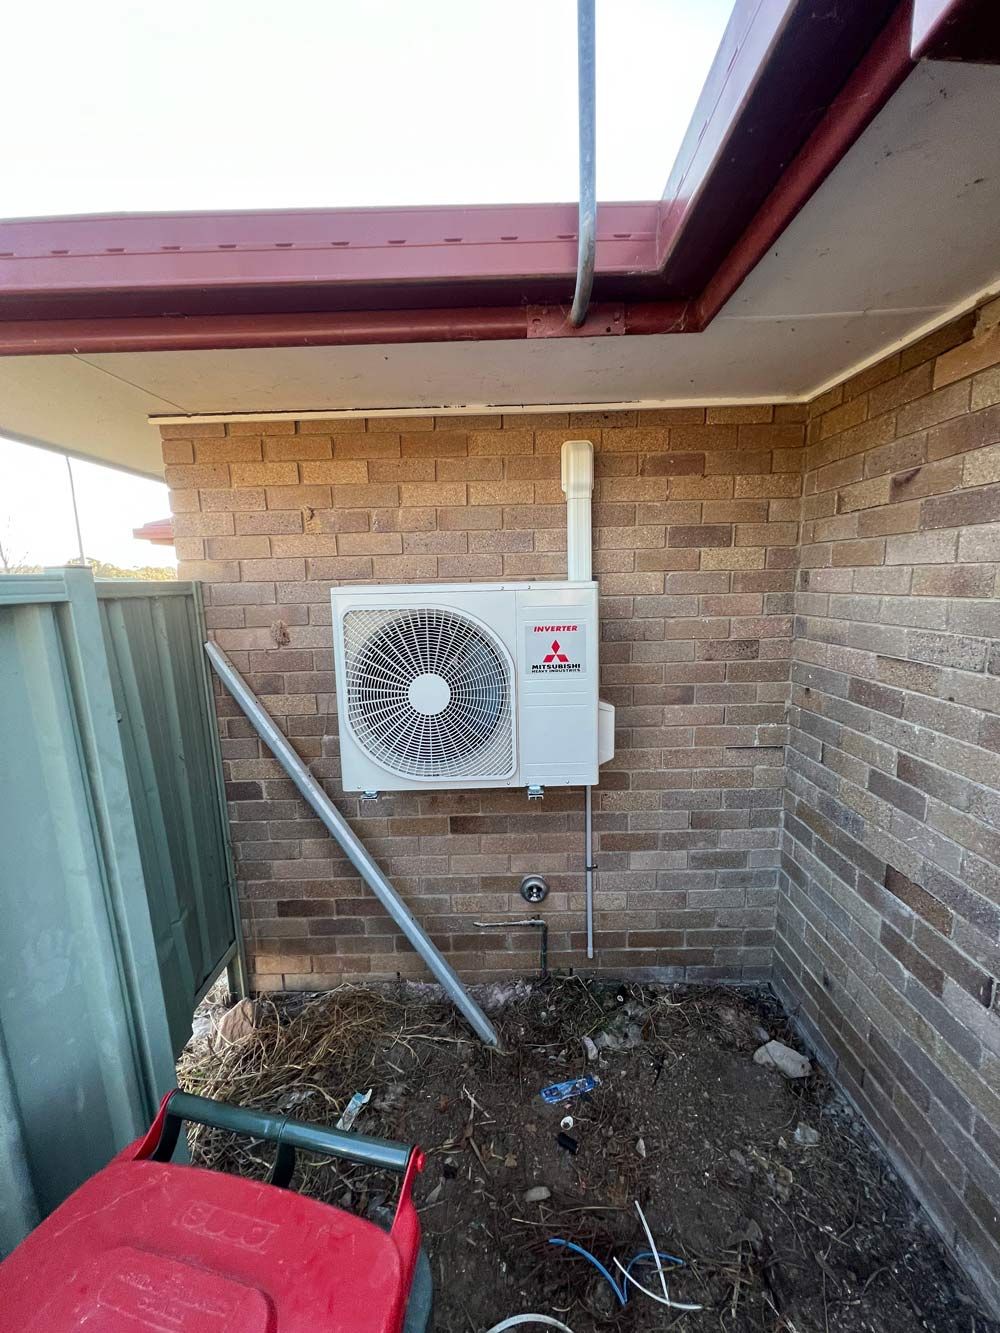 An Outdoor Compressor Hanging on the Wall — Electrician in Armidale, NSW